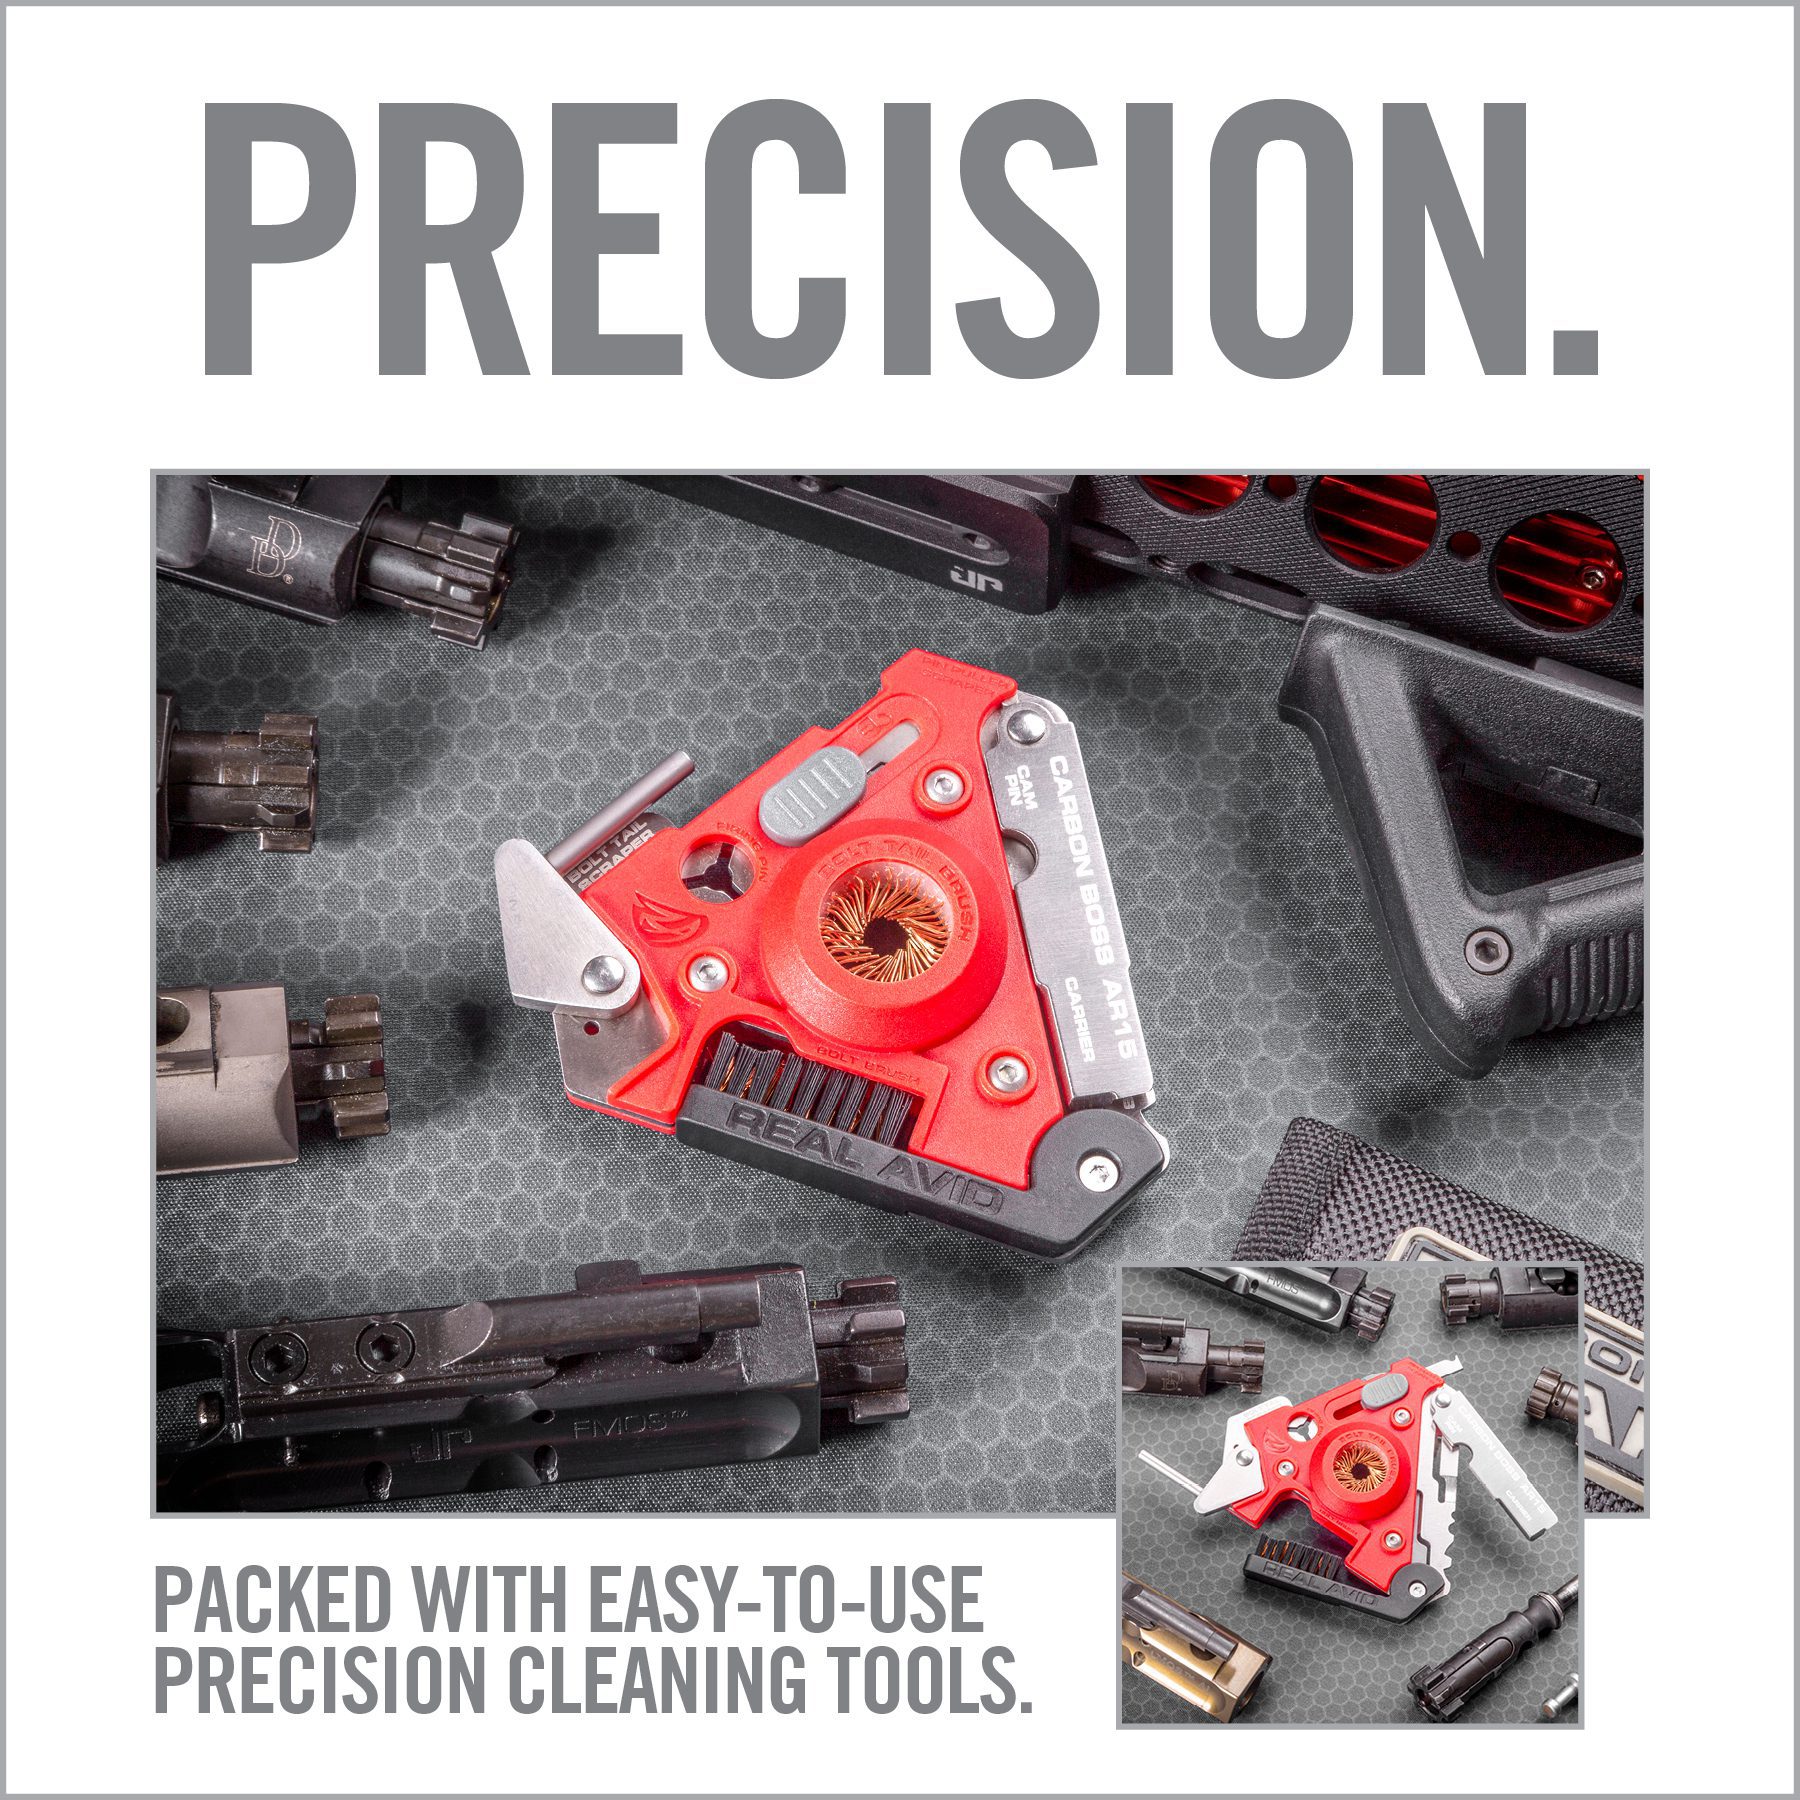 the cover of precision magazine shows various tools